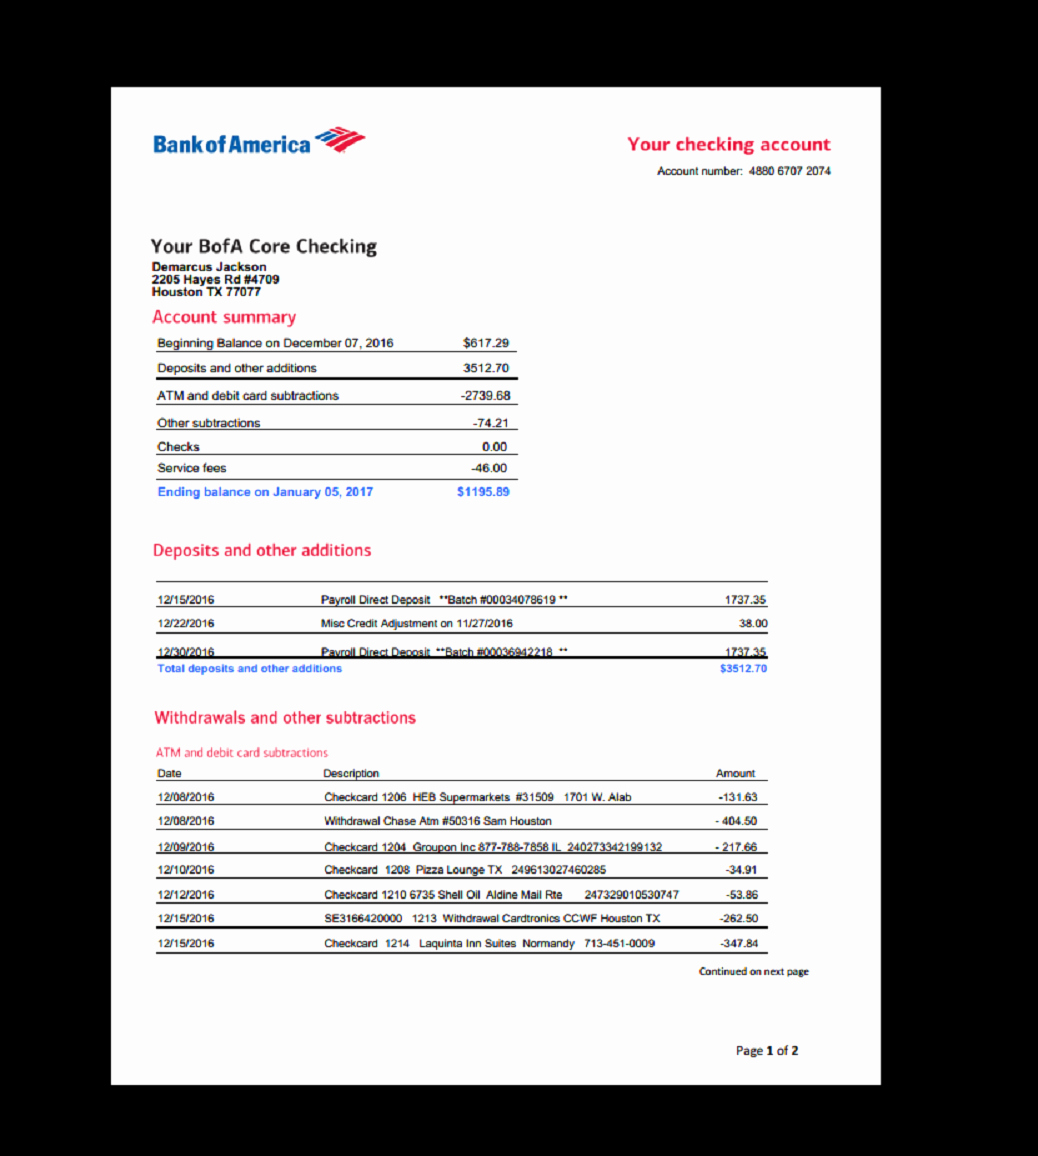 free fake bank statements templates unique bank statement bank america template in e earnings of free fake bank statements templates